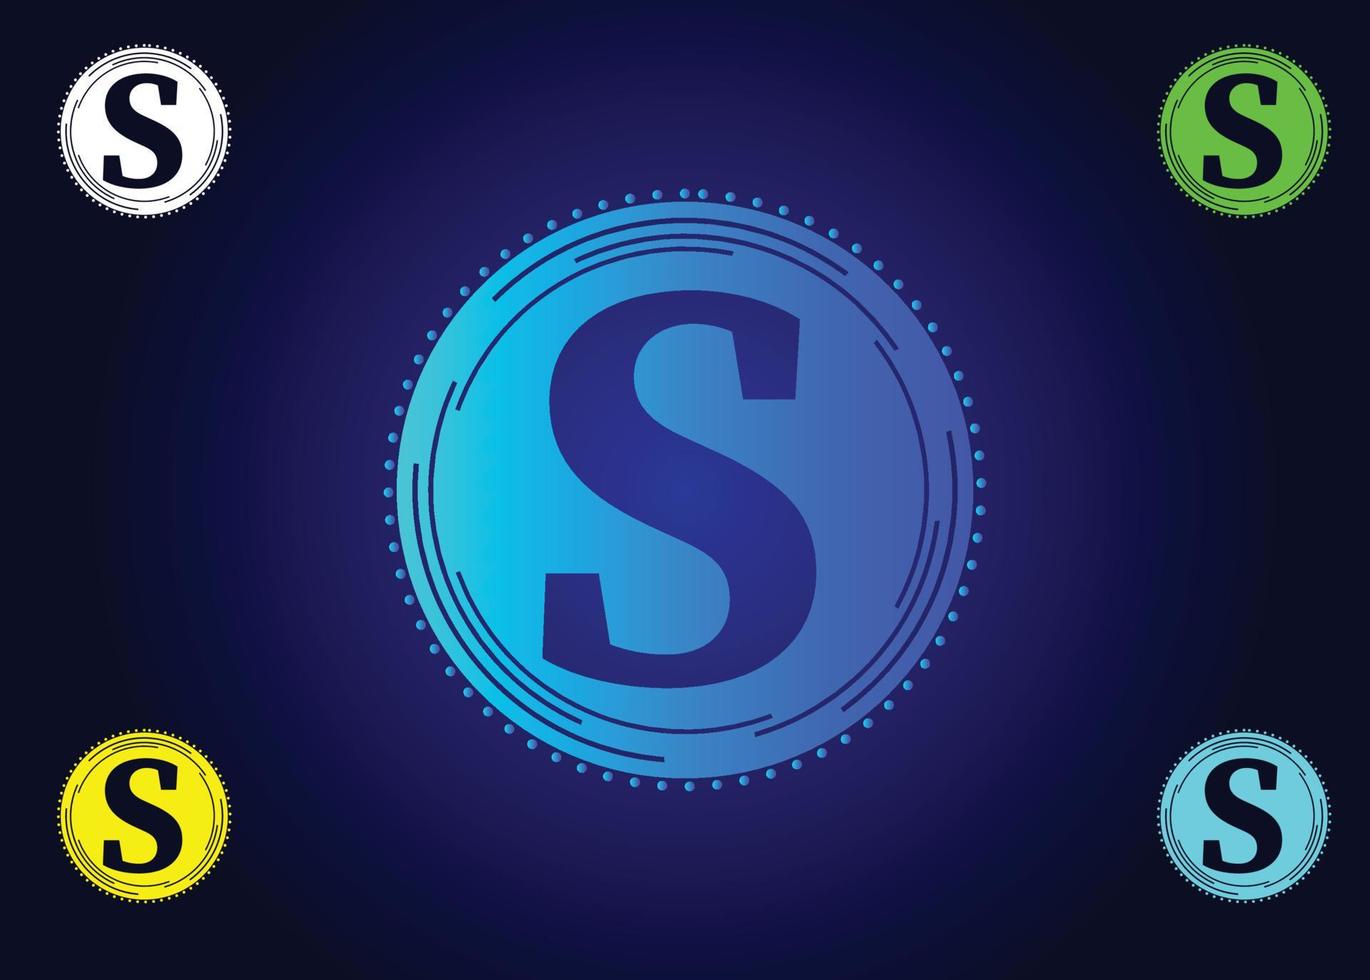 S new letter logo and icon design vector